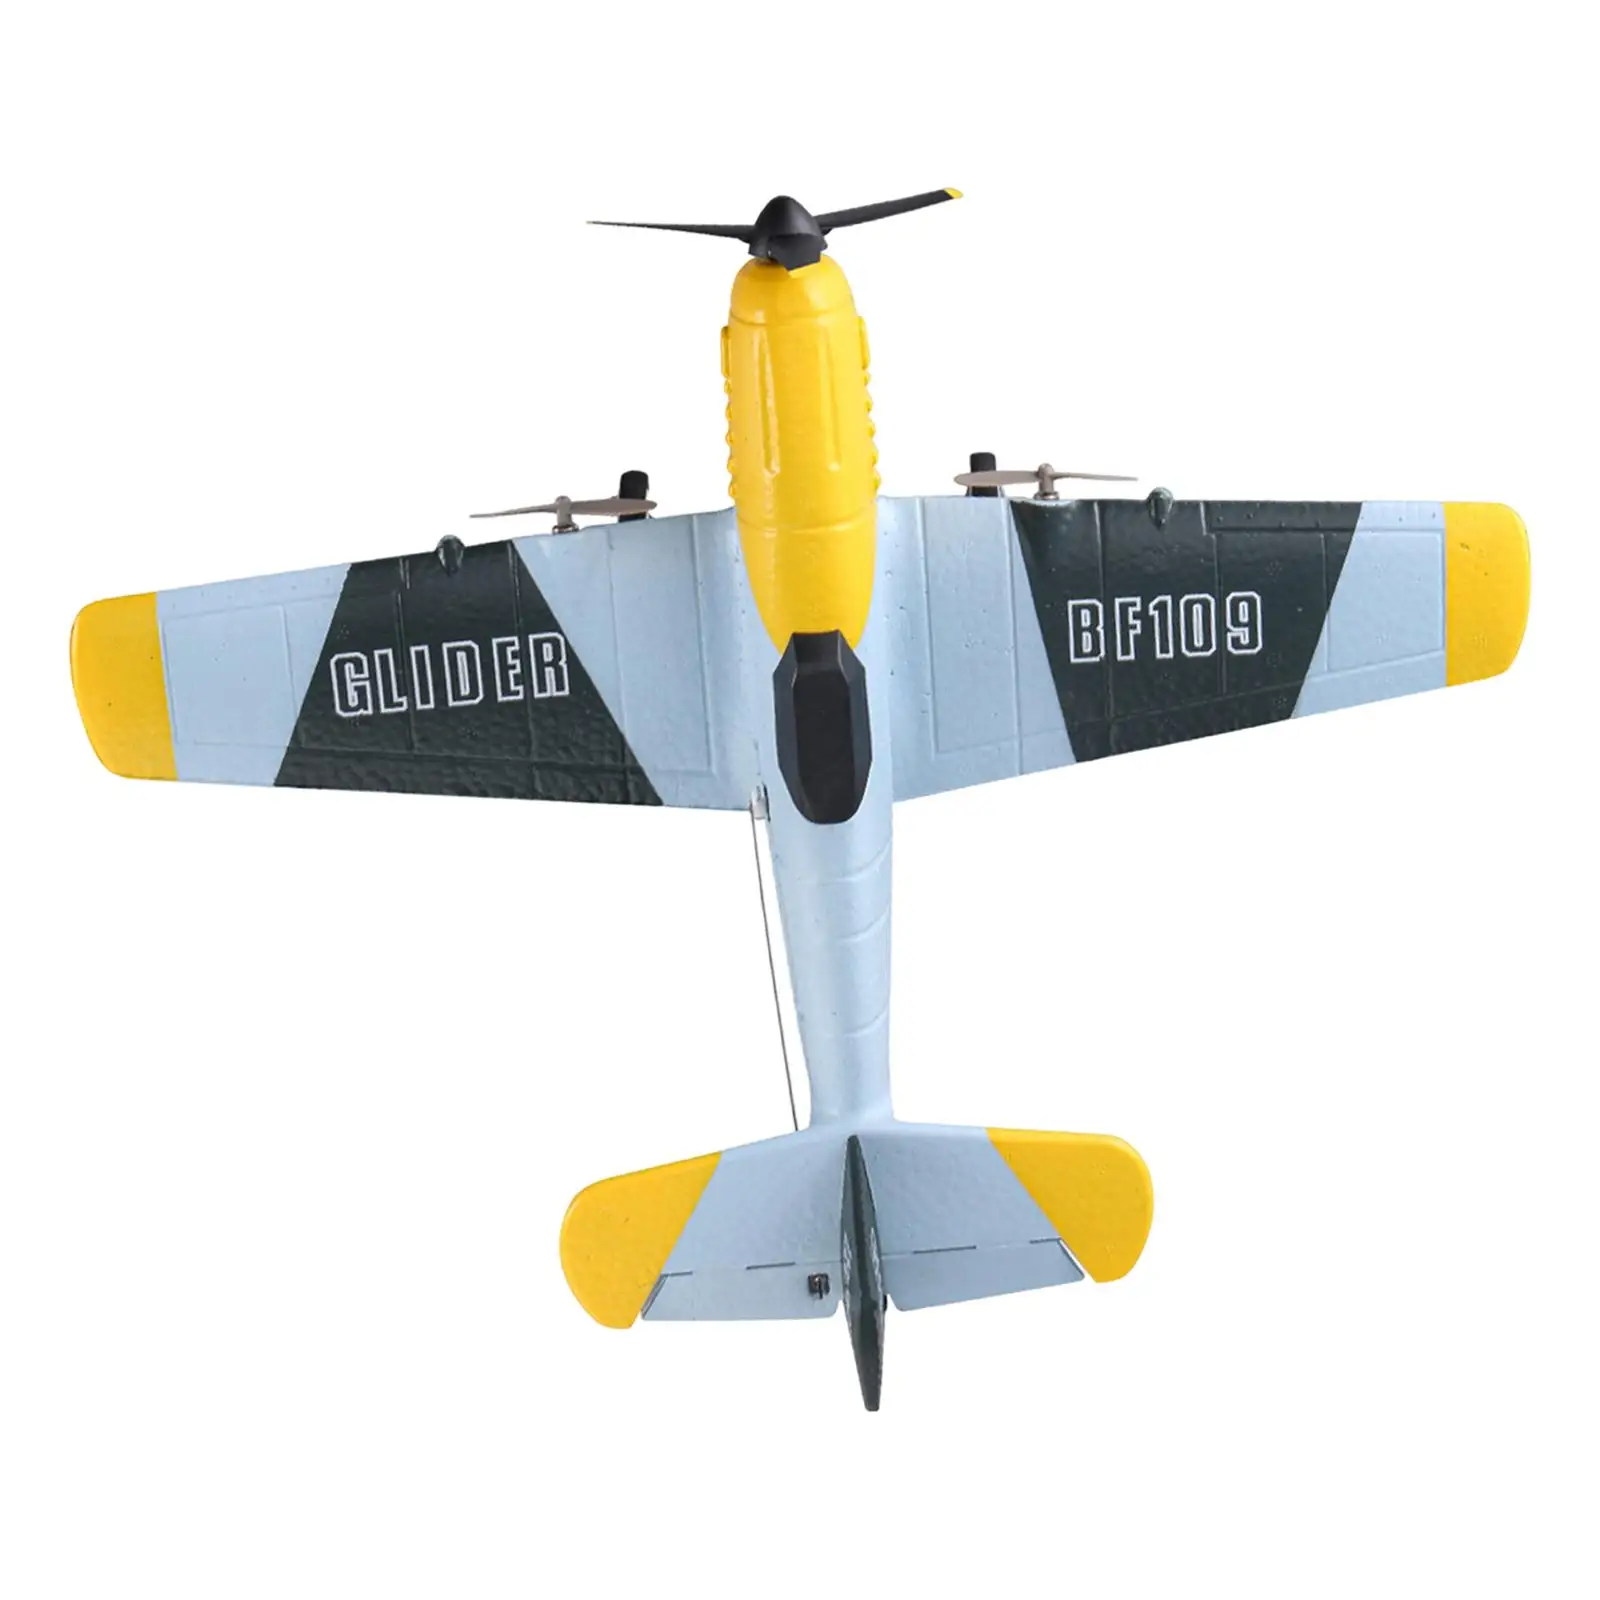 RC Planes 2.4G Lightweight Gift RC Glider Aircraft RC Aircraft Jet Easy to Fly for Beginner Adults Kids Boys Girls